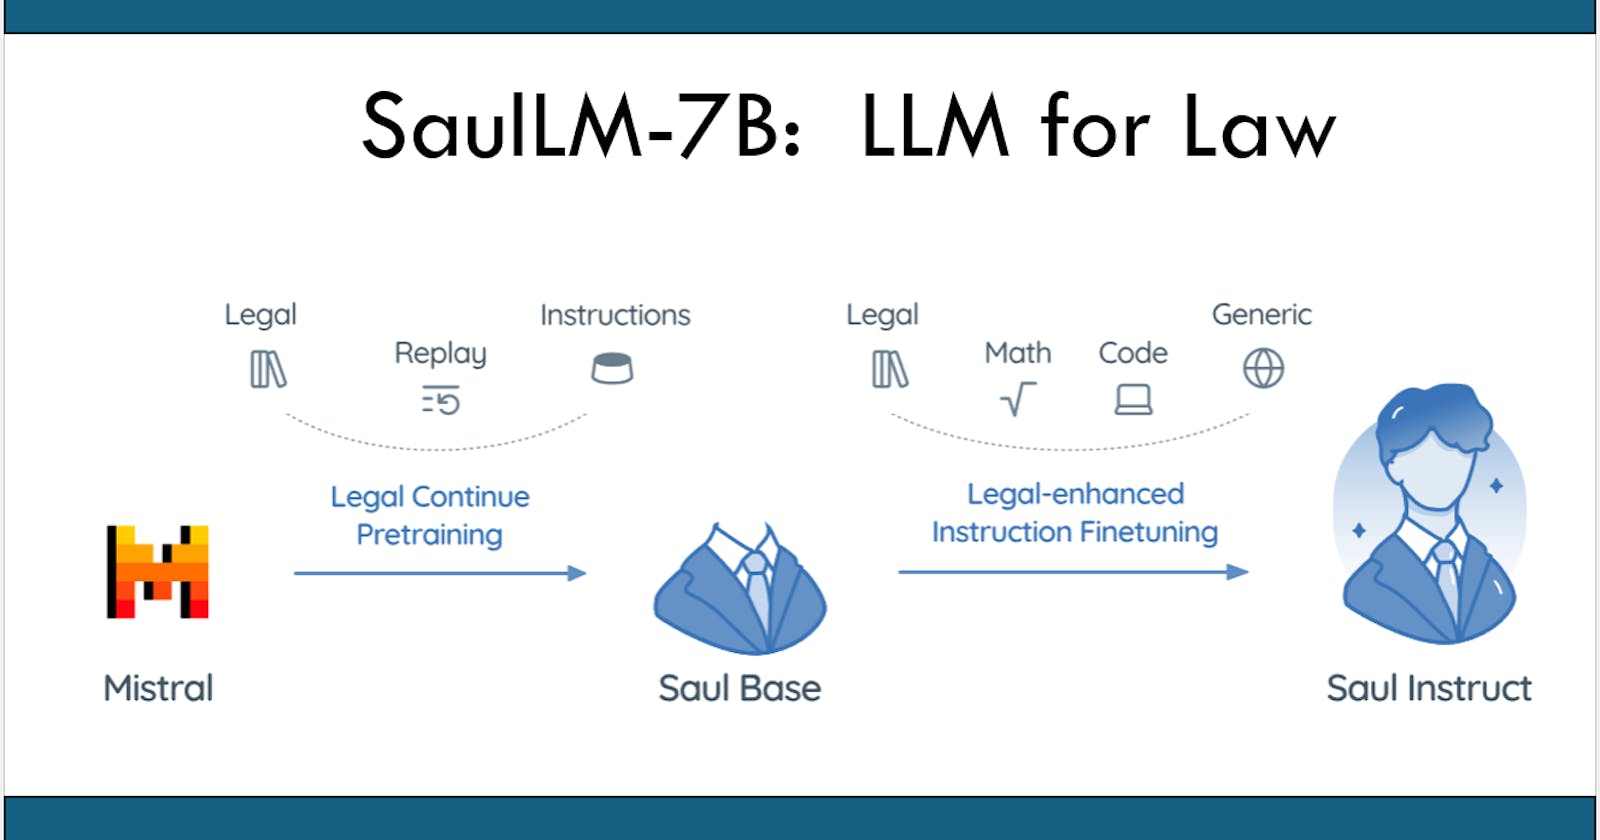 SaulLM-7B: A pioneering Large Language Model for Law (short summary)